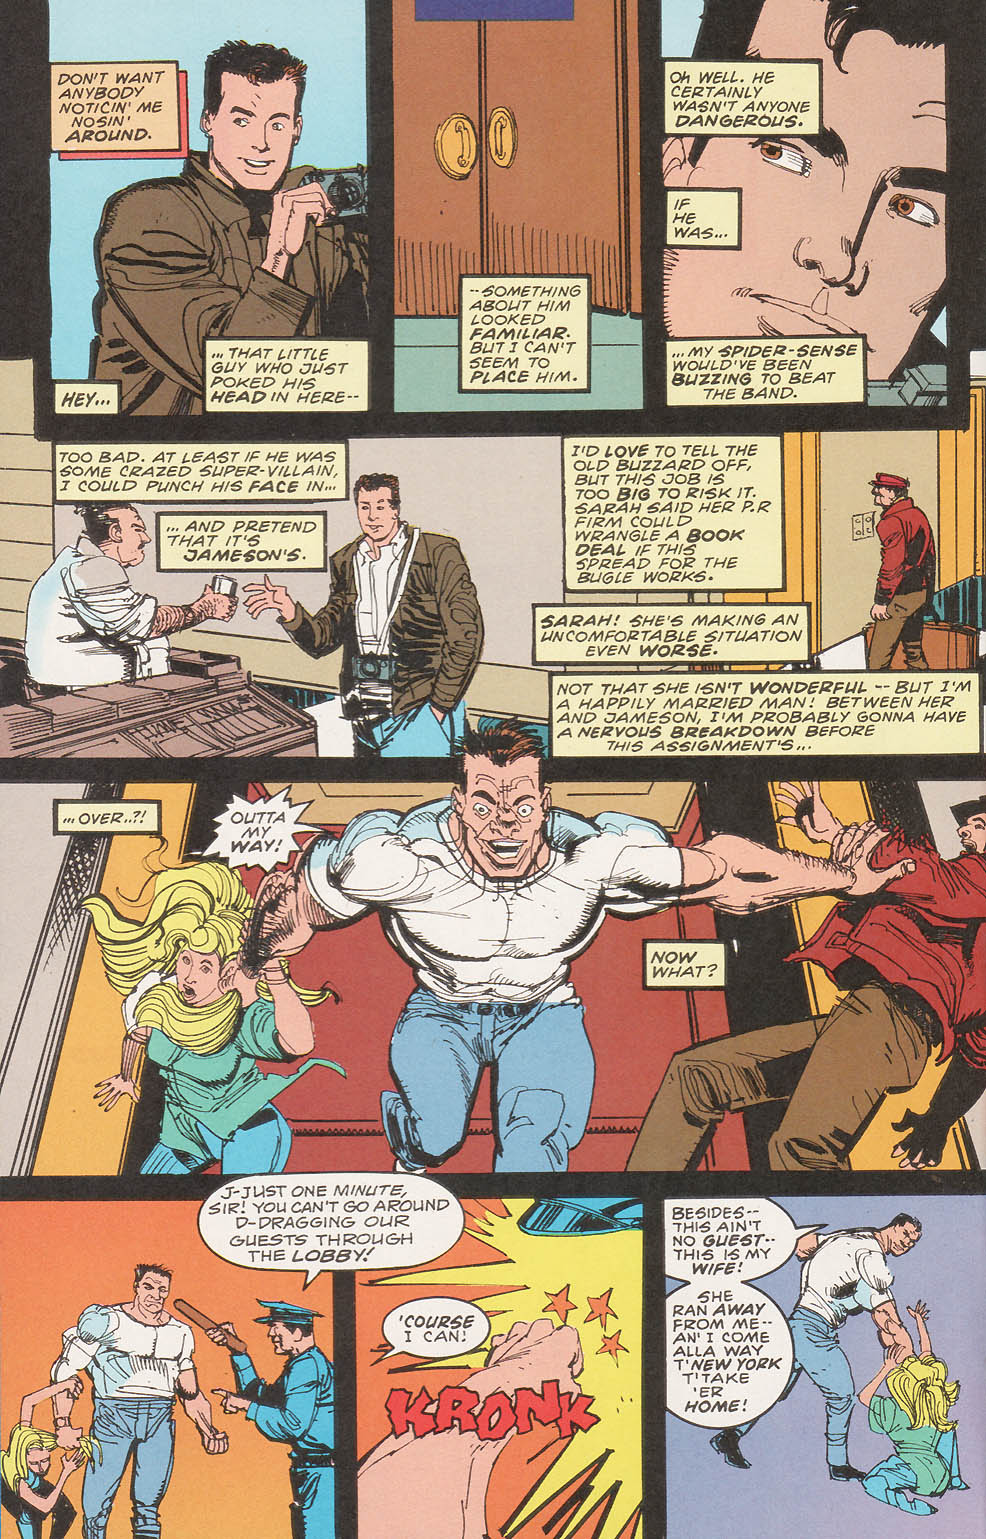 Spider-Man (1990) 39_-_Light_The_Night_Part_2_of_3 Page 7